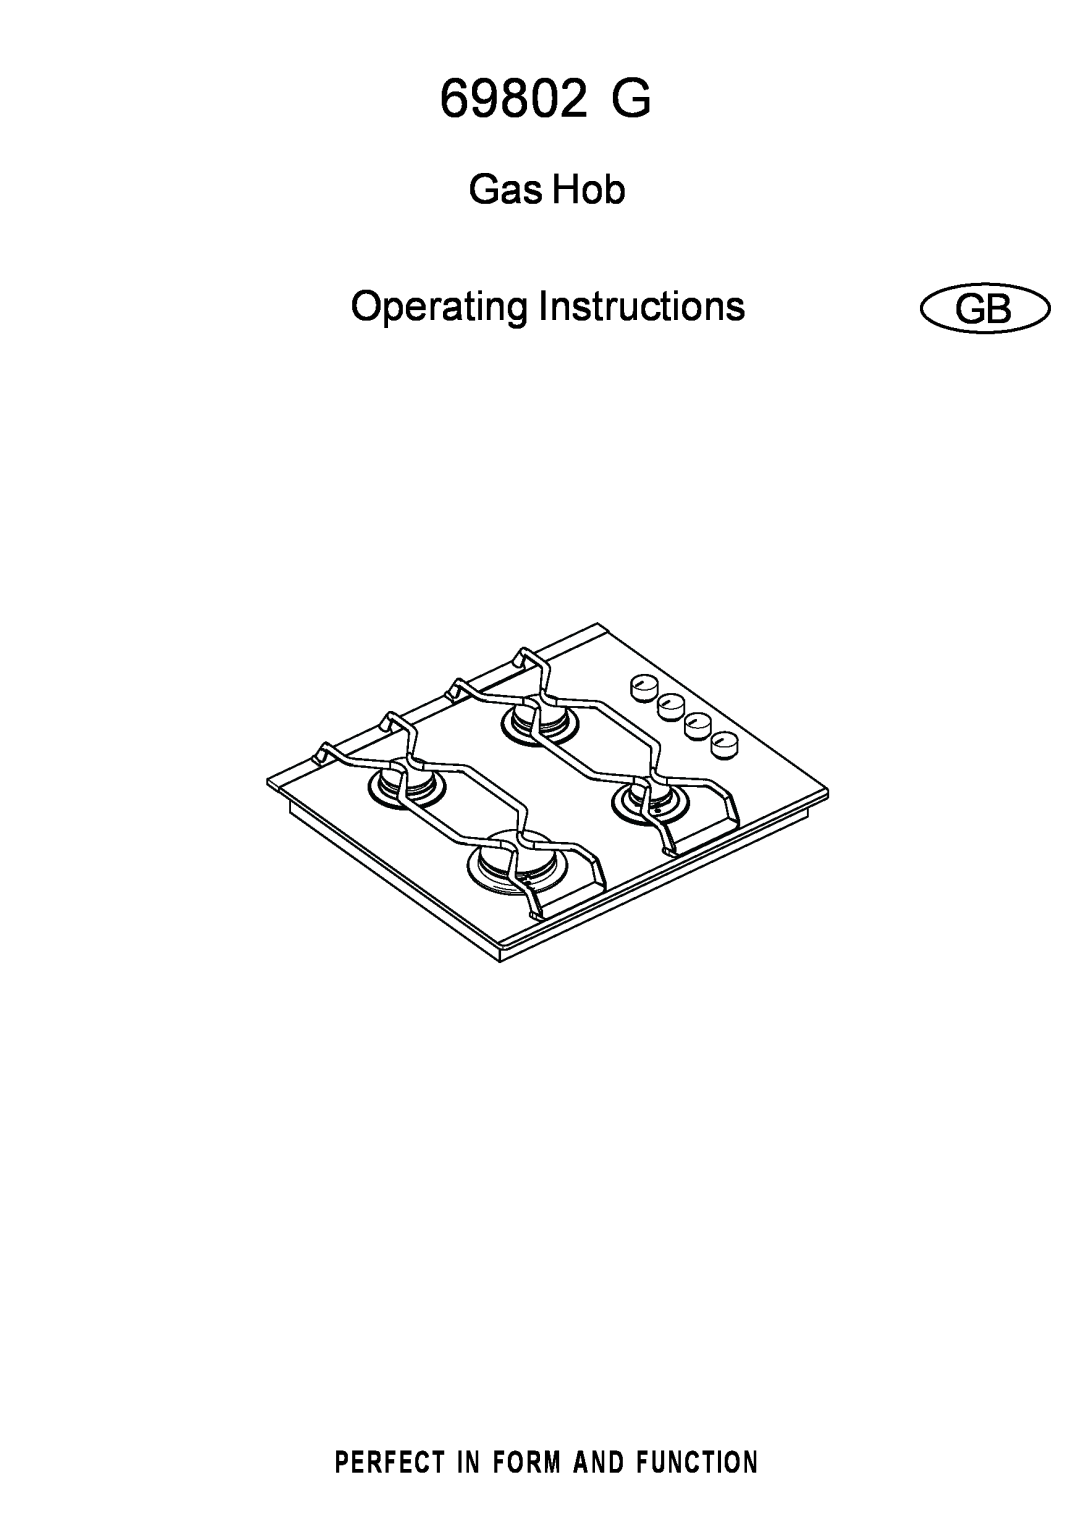 Electrolux 69802 G manual Gas Hob, Operating Instructions, Perfect In Form And Function 